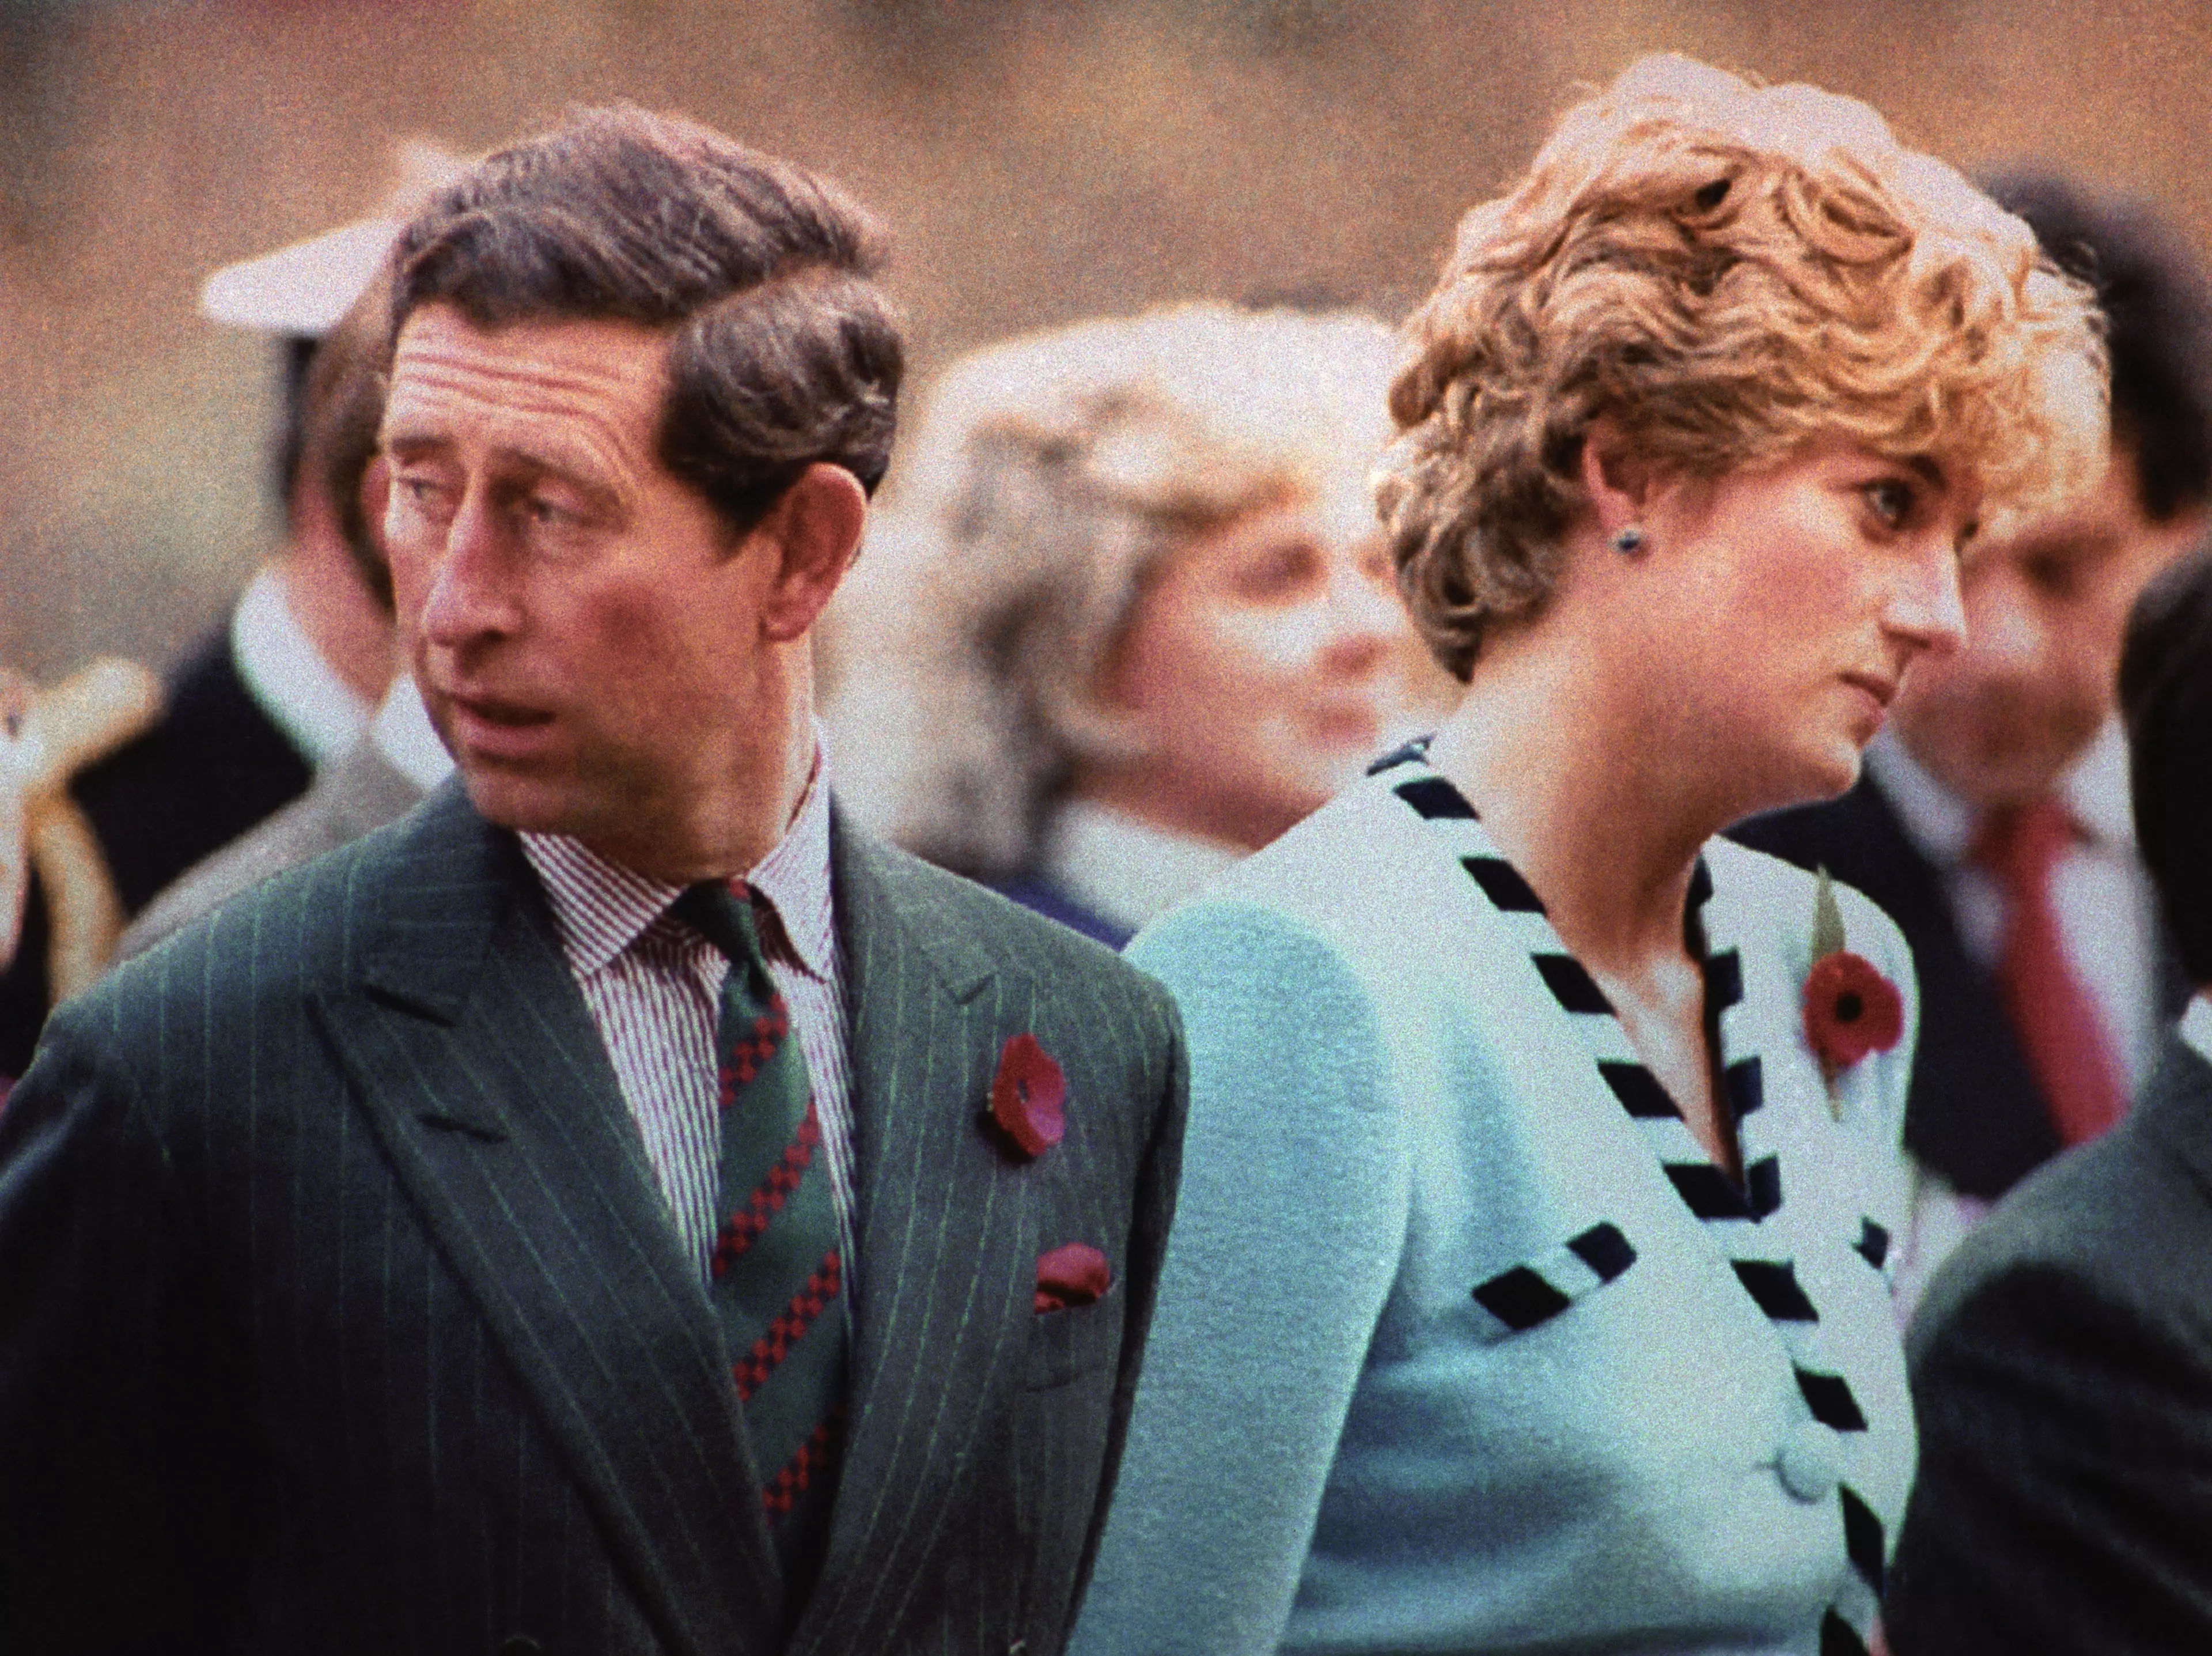 The film will document Princess Diana and Prince Charles' marriage breakdown (